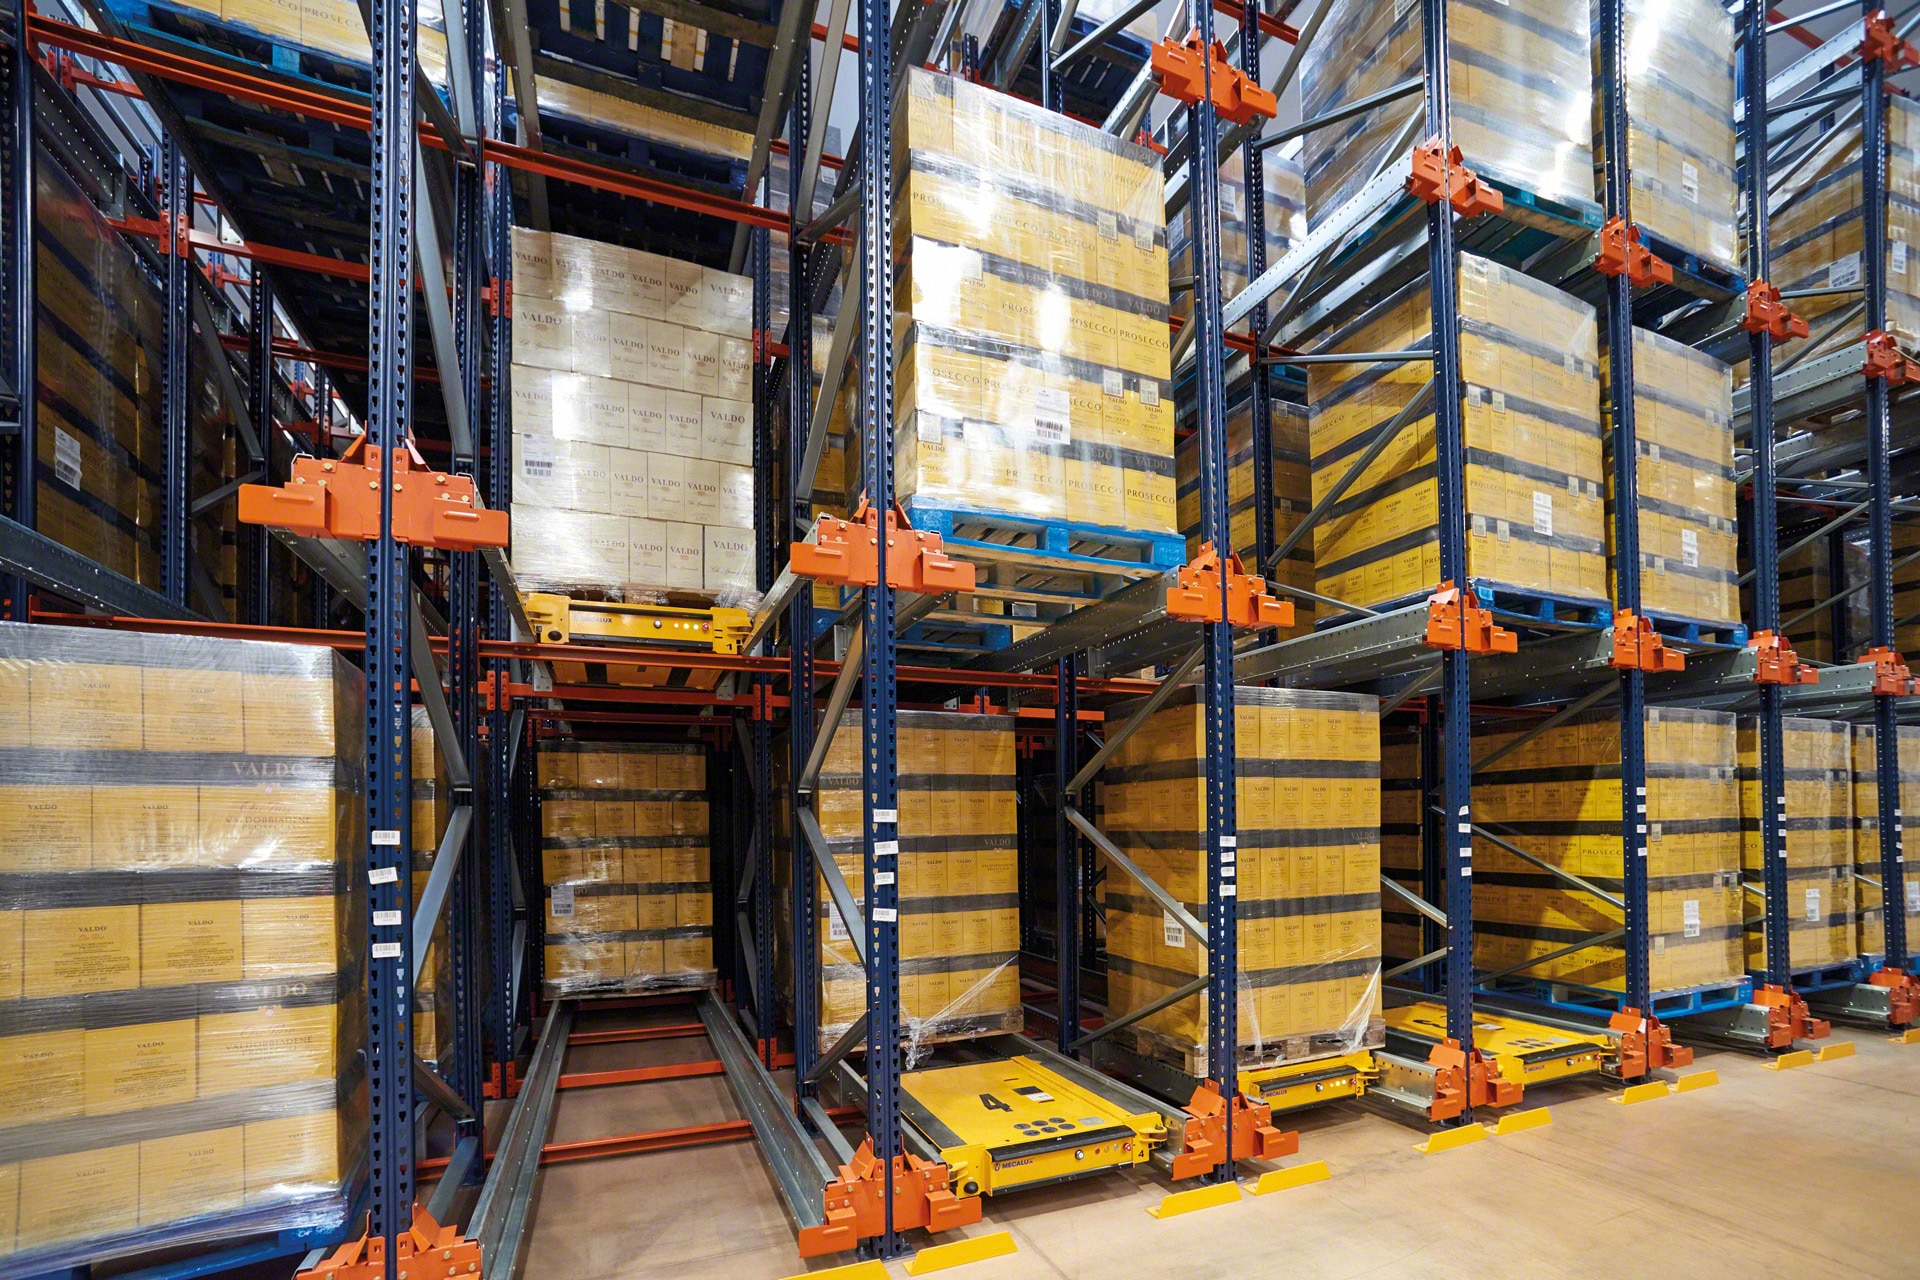 In compact racking systems, one shuttle can be placed in each channel to increase productivity